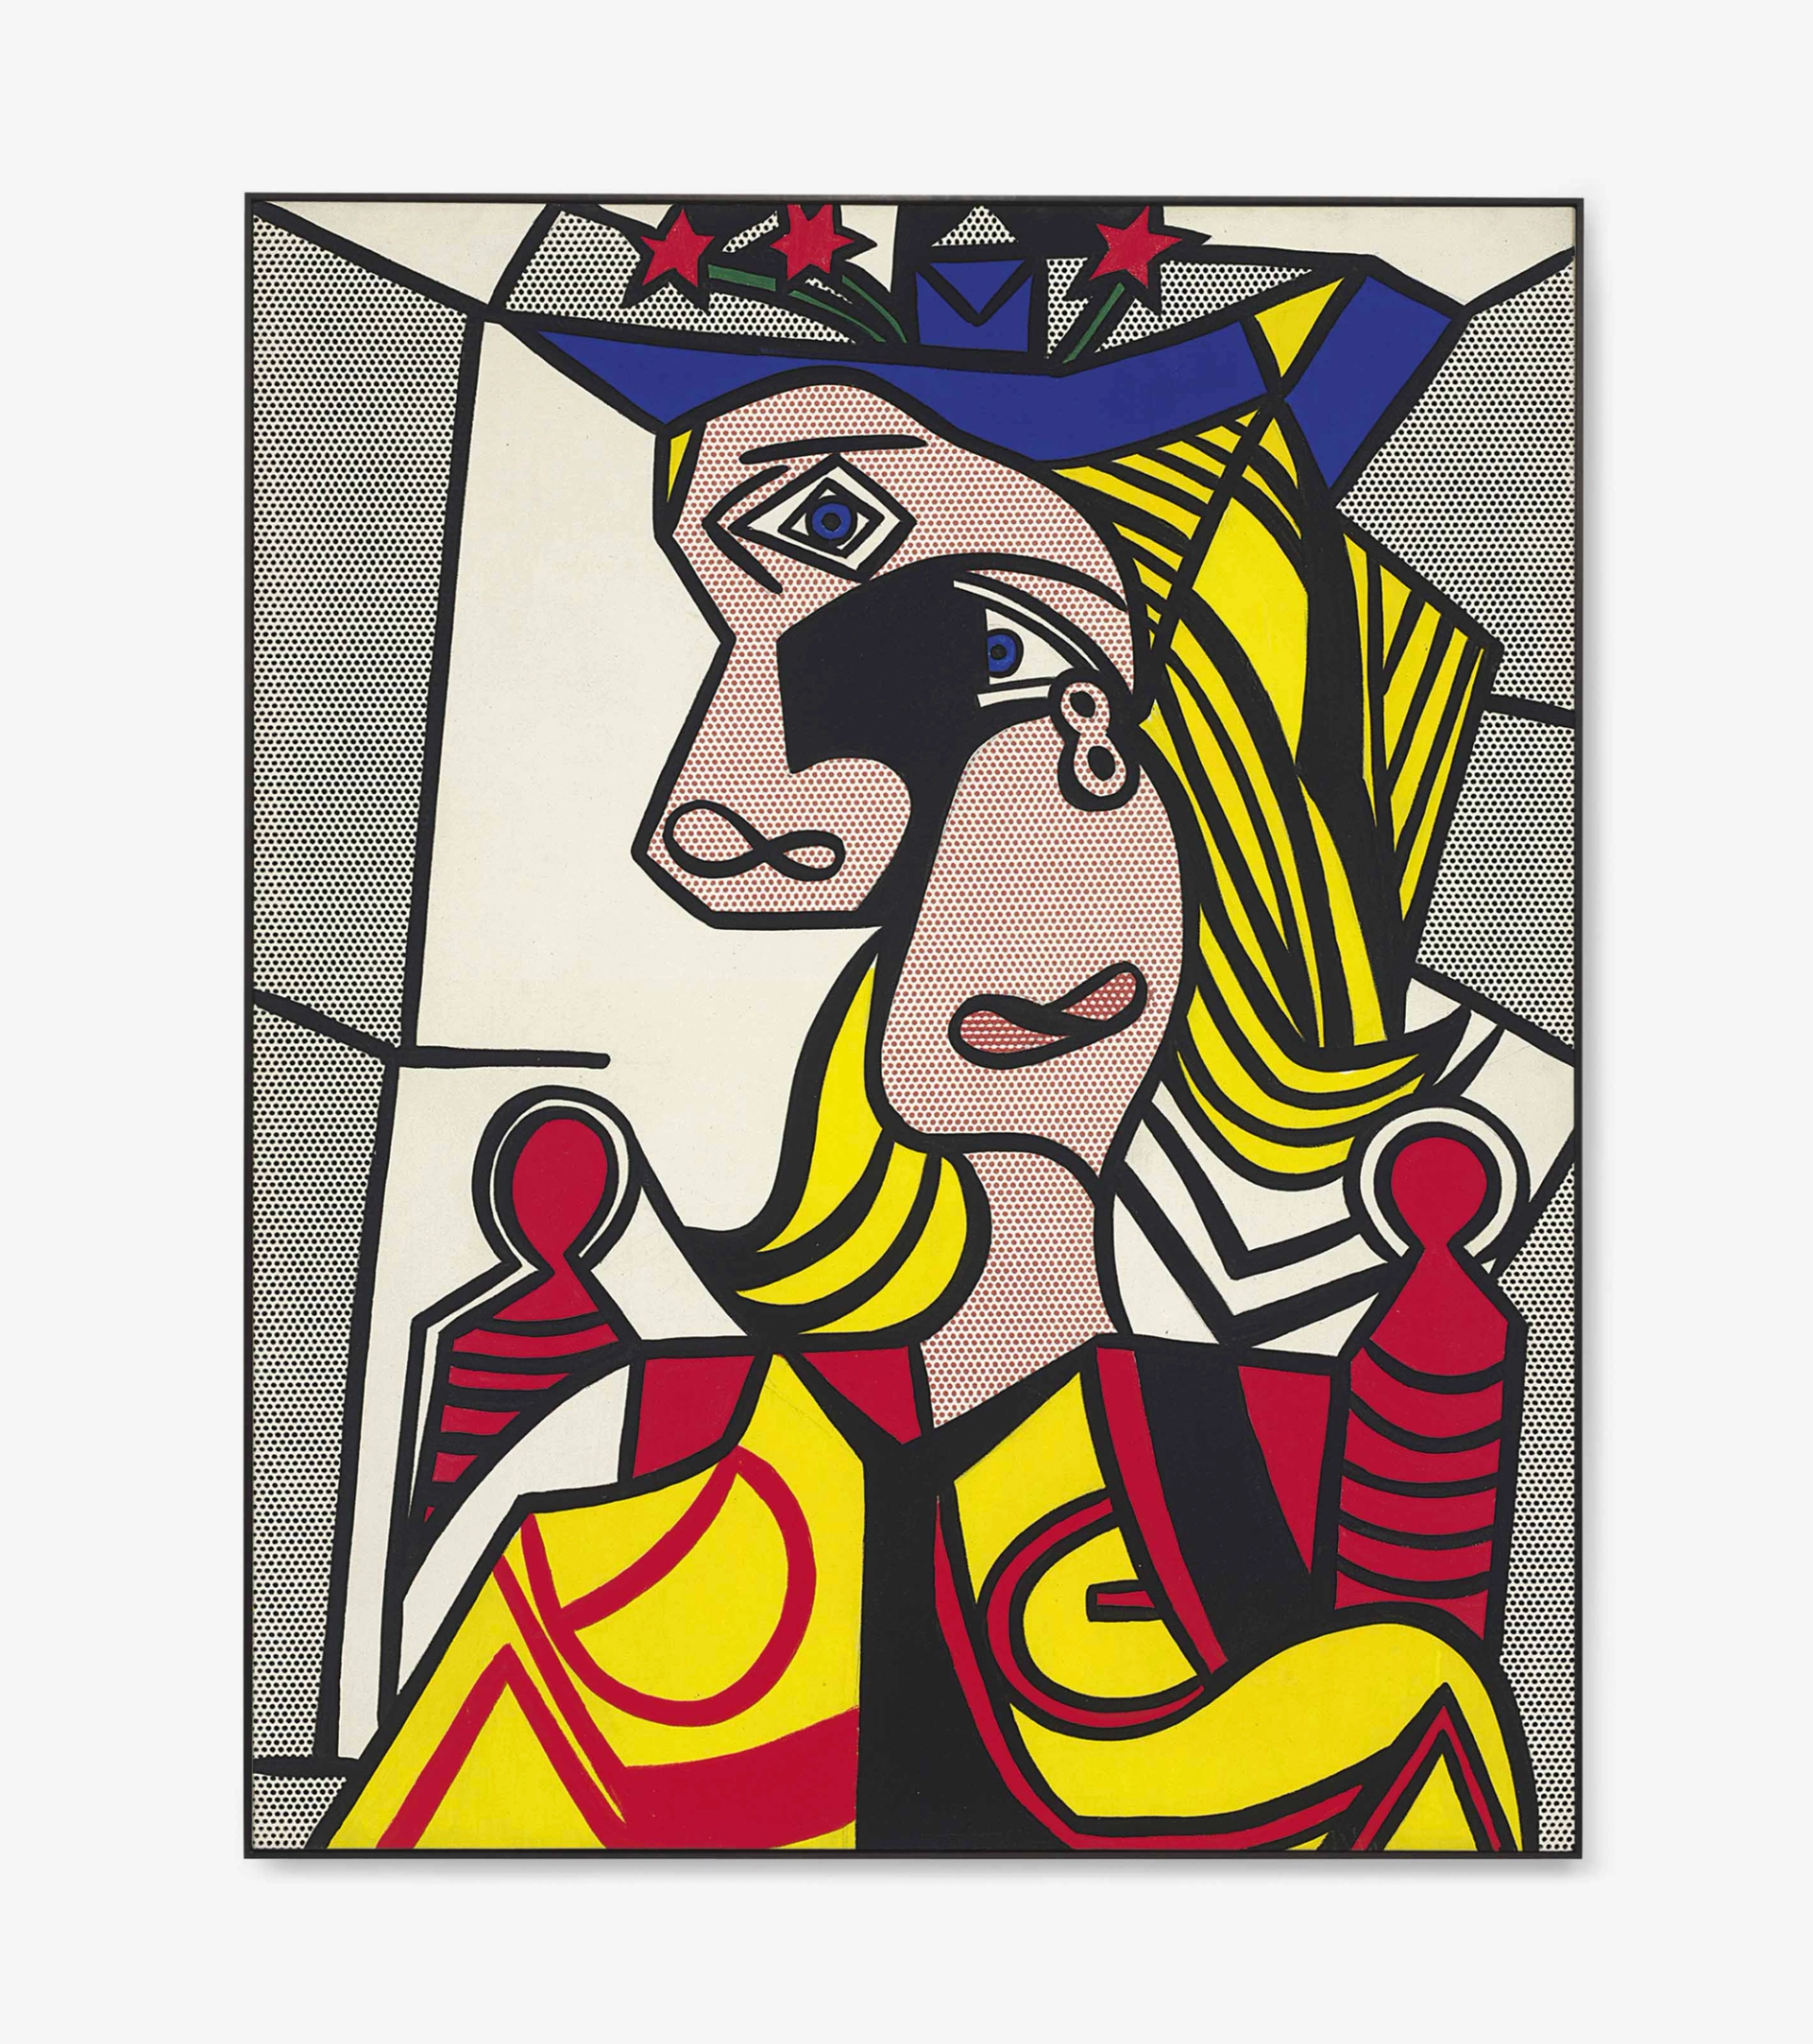 In this painting, the primary hues of his faux-print technique meets the distorted features of a Picasso portrait, creating an artful and meticulous collision between two trademark styles.